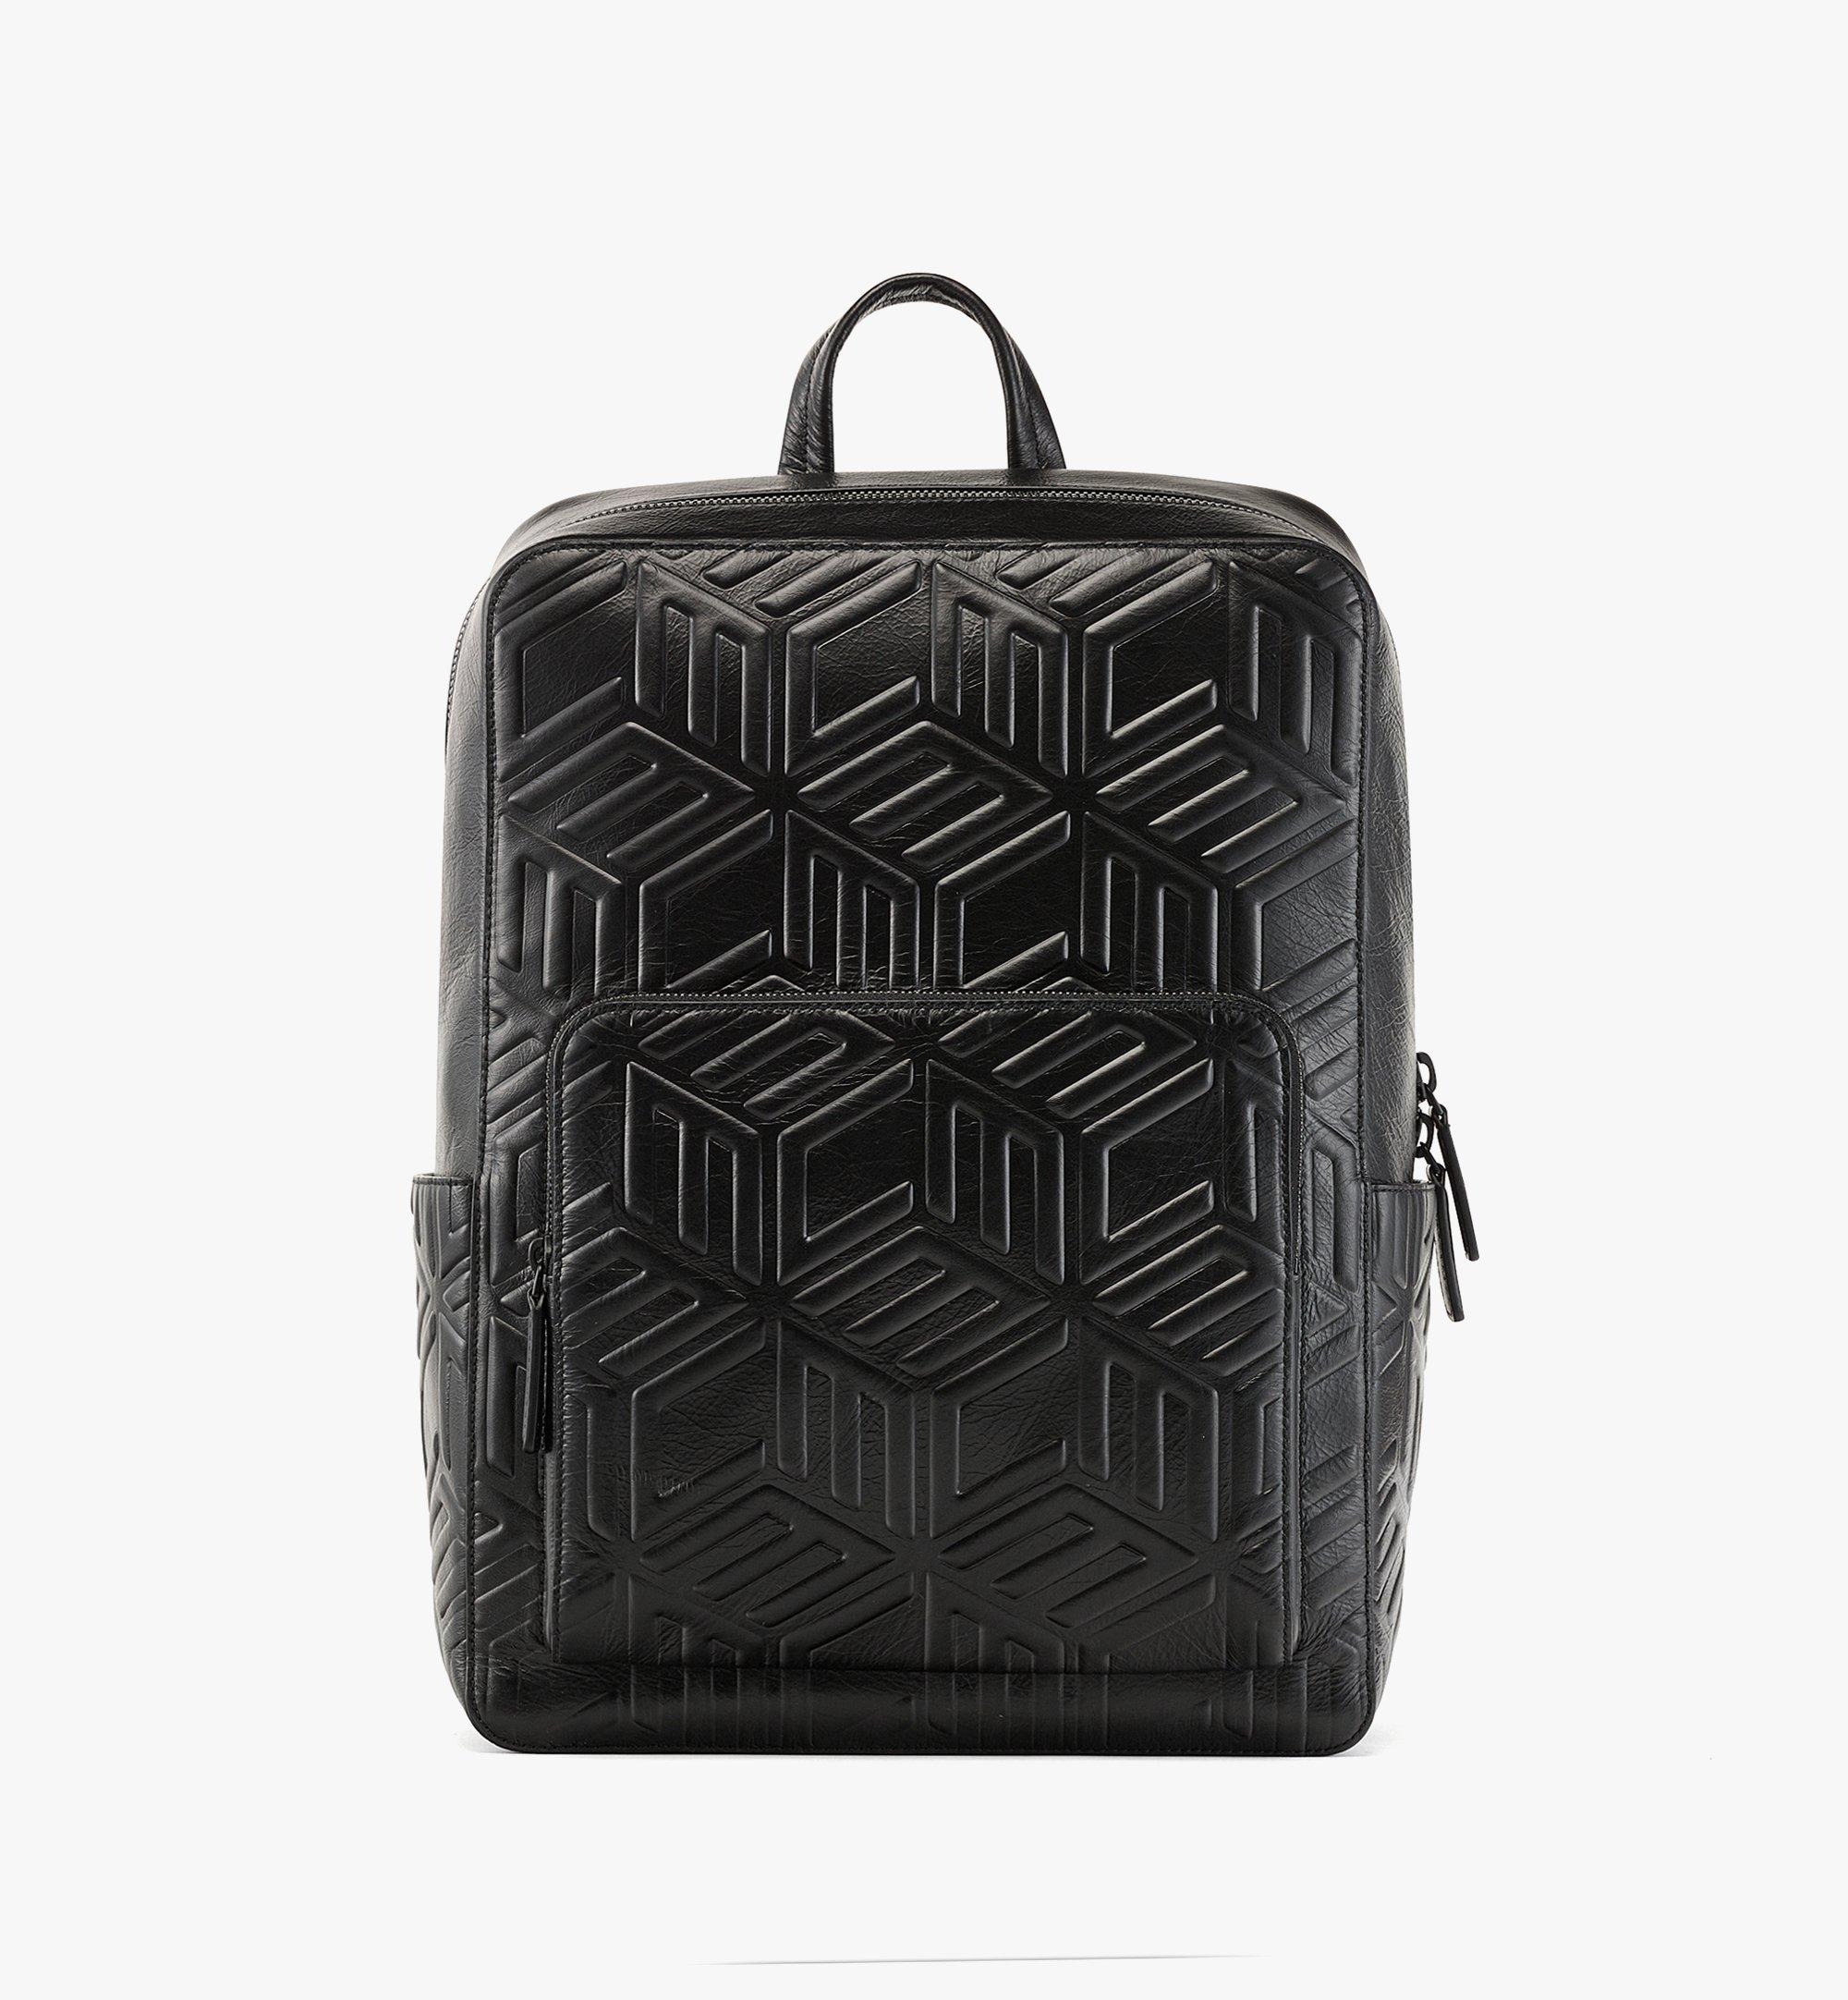 MCM Aren Backpack in Crushed Cubic Leather Black MMKDATA02BK001 Alternate View 1